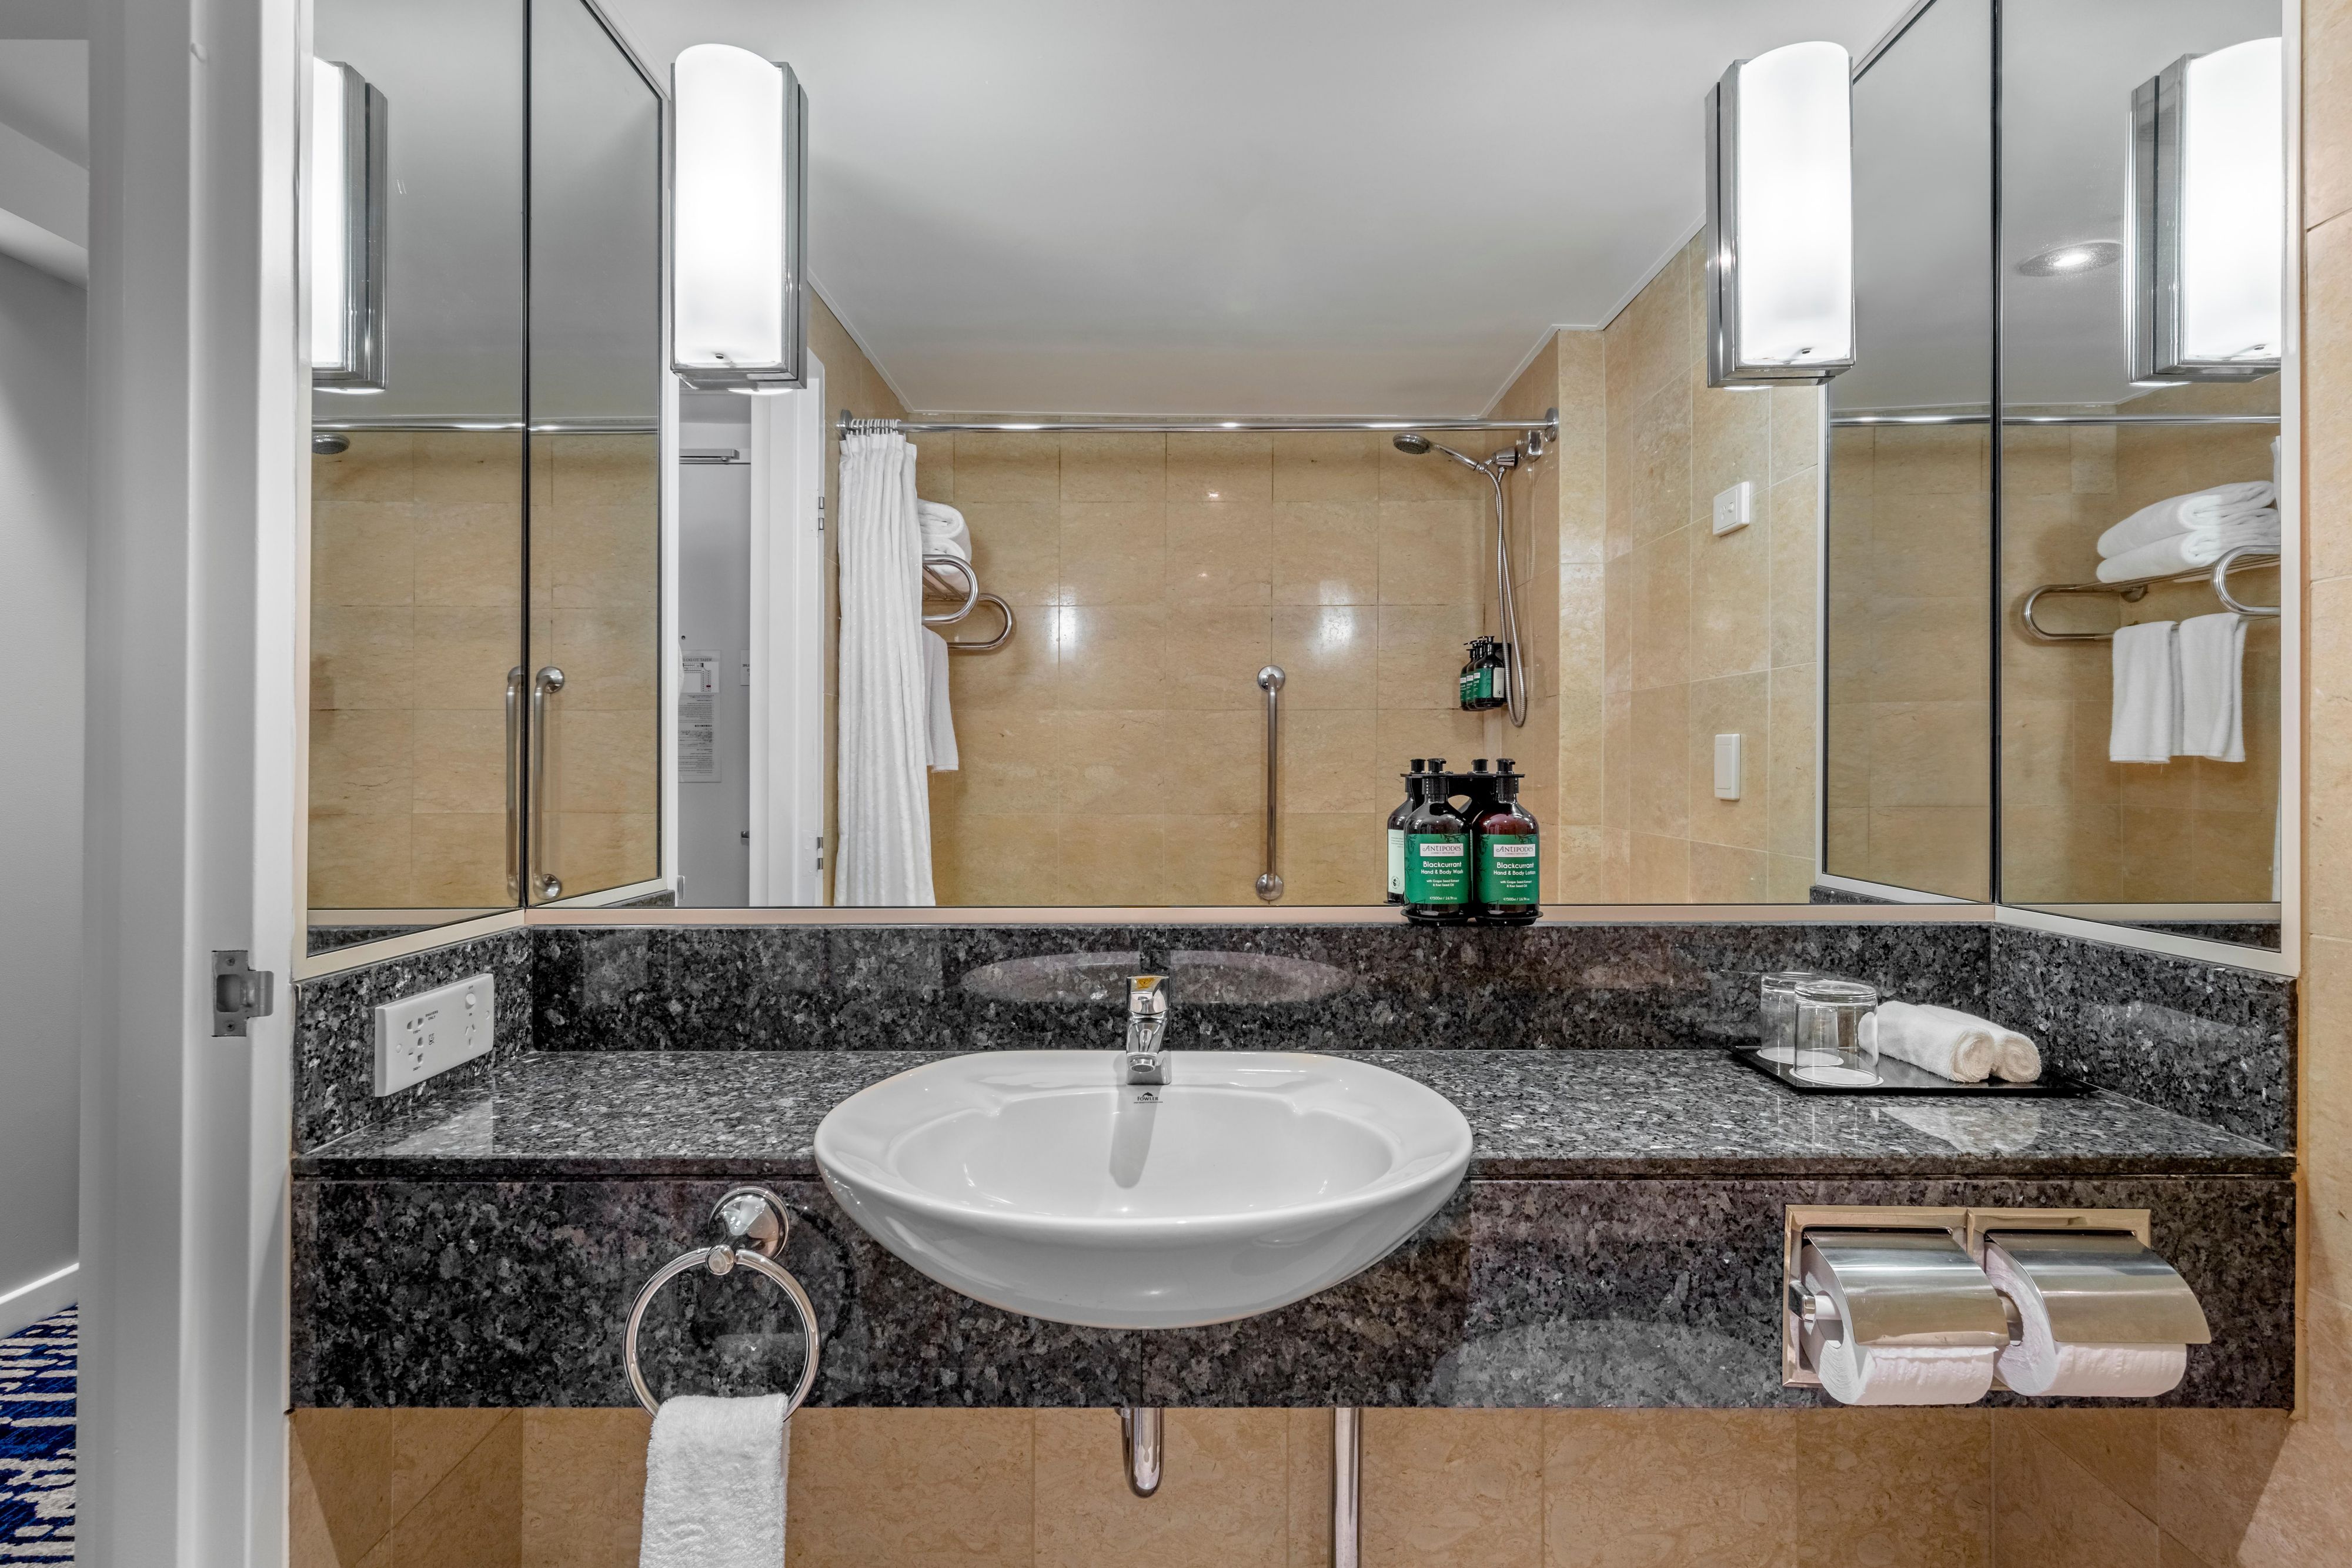 Classic bathroom with Antipodes amenities and shower over bath